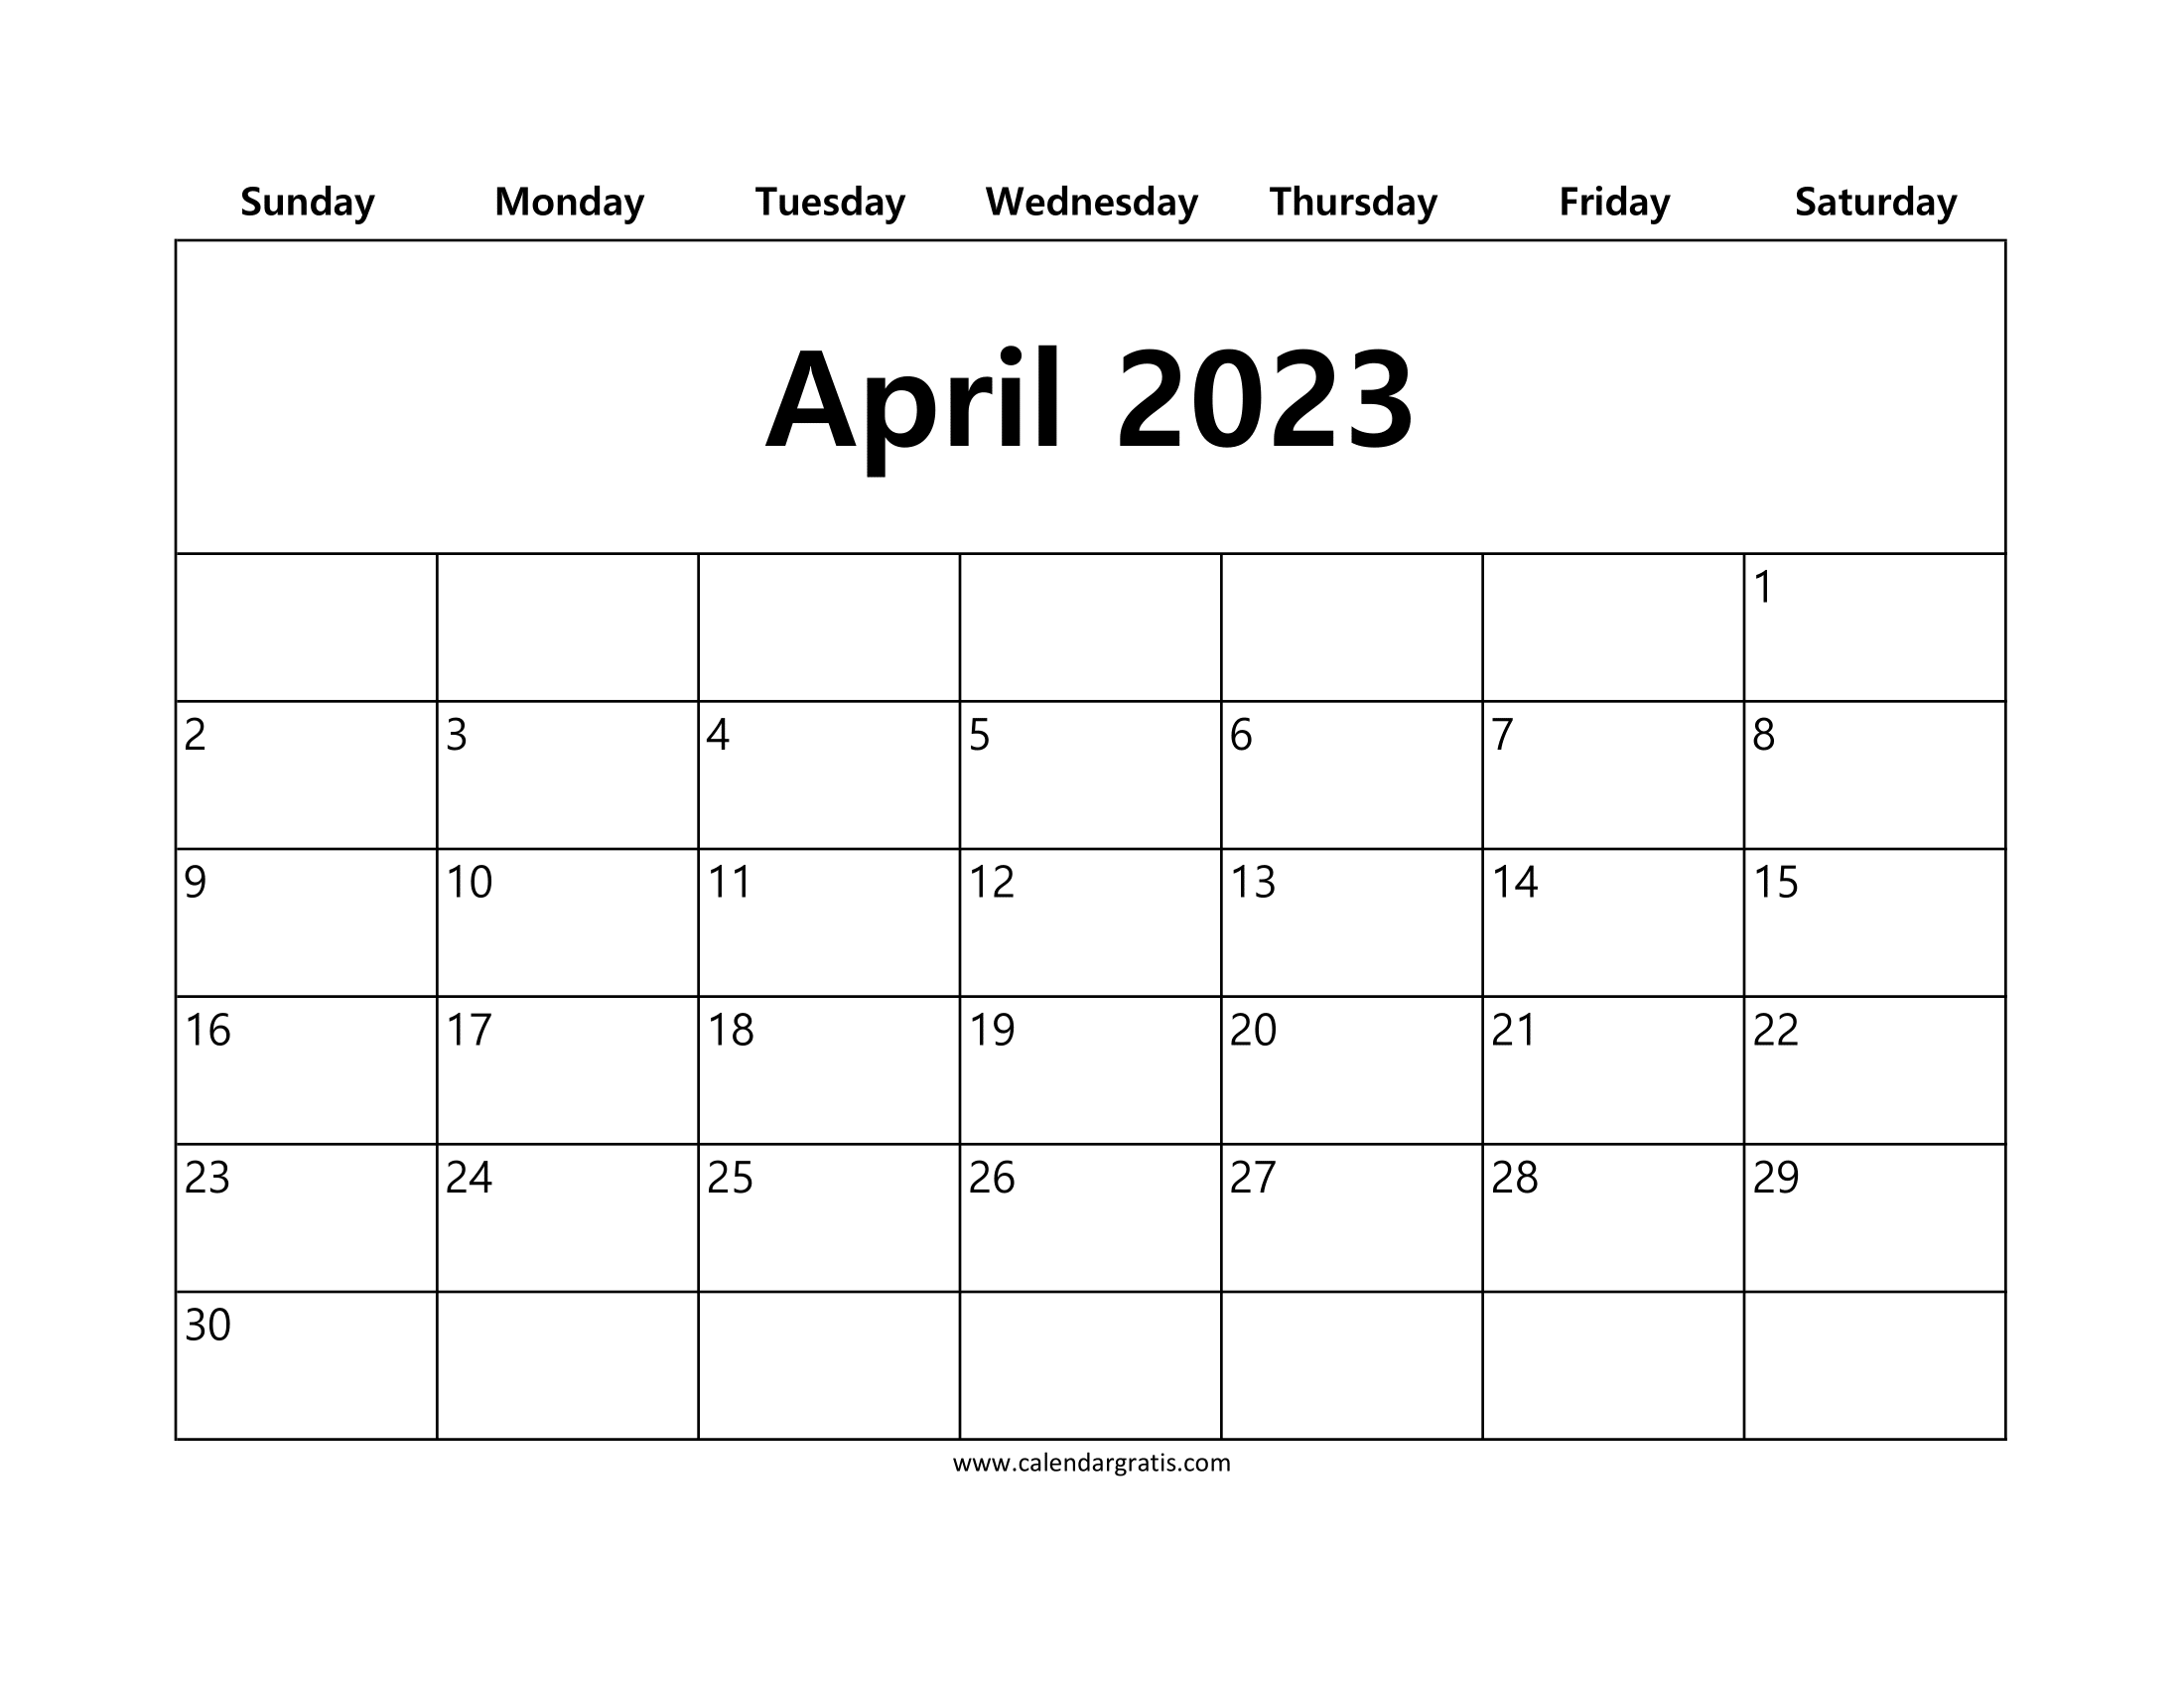 Free printable April 2023 calendar with simple white background layout.